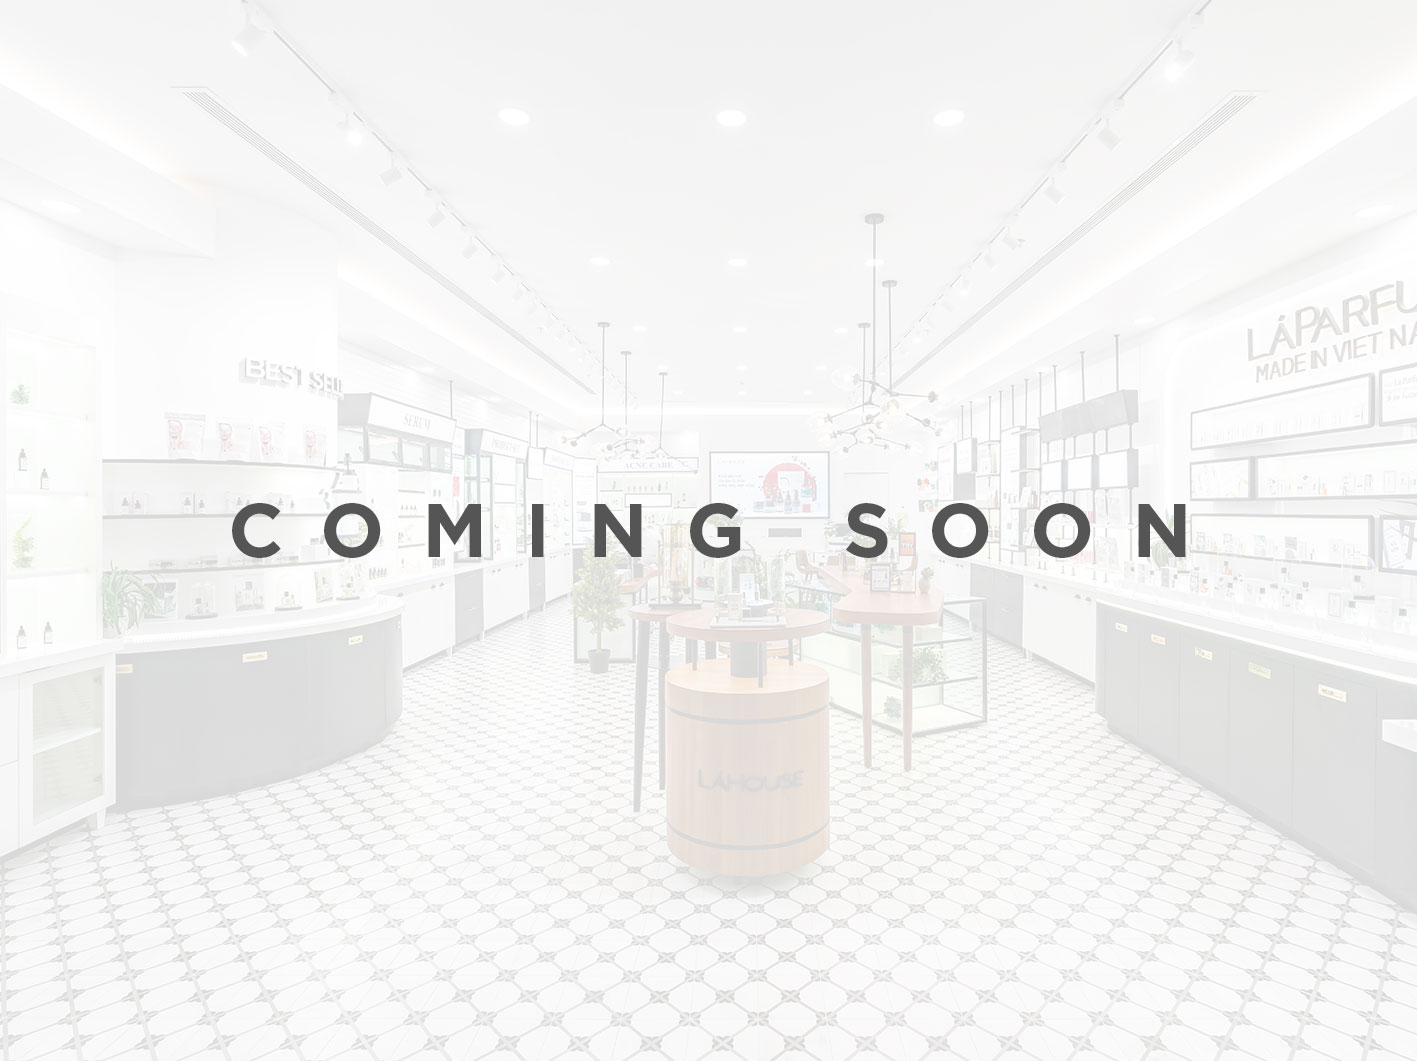 New store coming soon